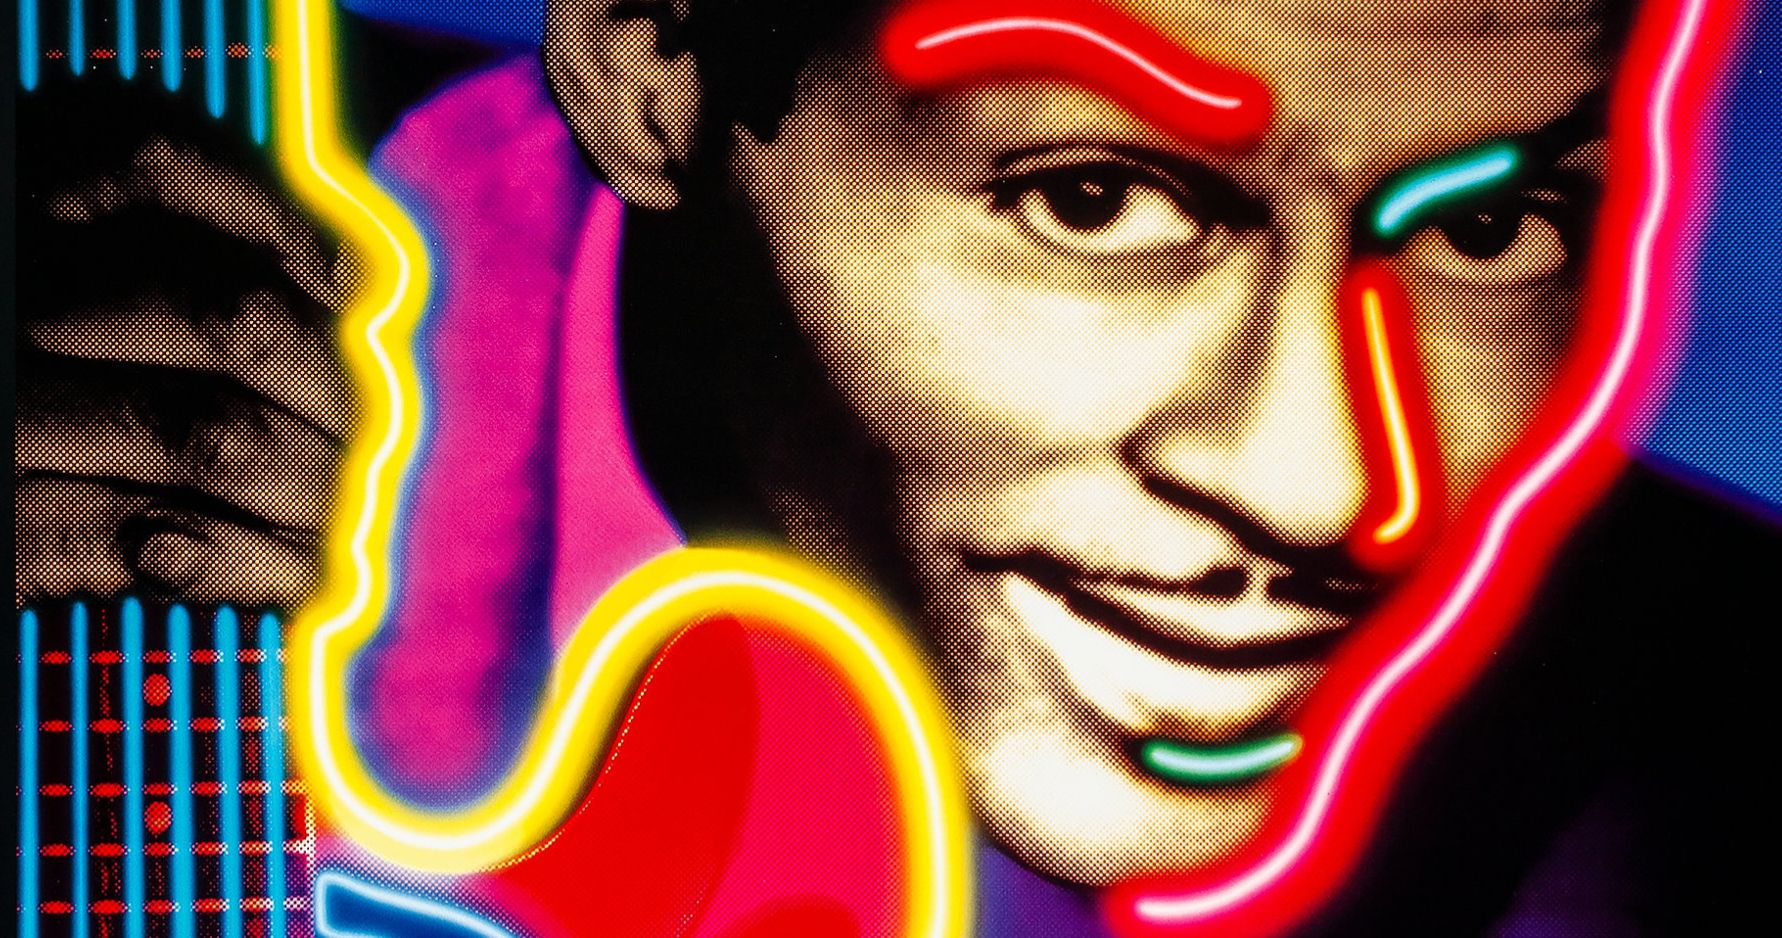 Chuck Berry Hail! Hail! Rock 'n' Roll Gets First-Ever Blu-ray Release This Fall